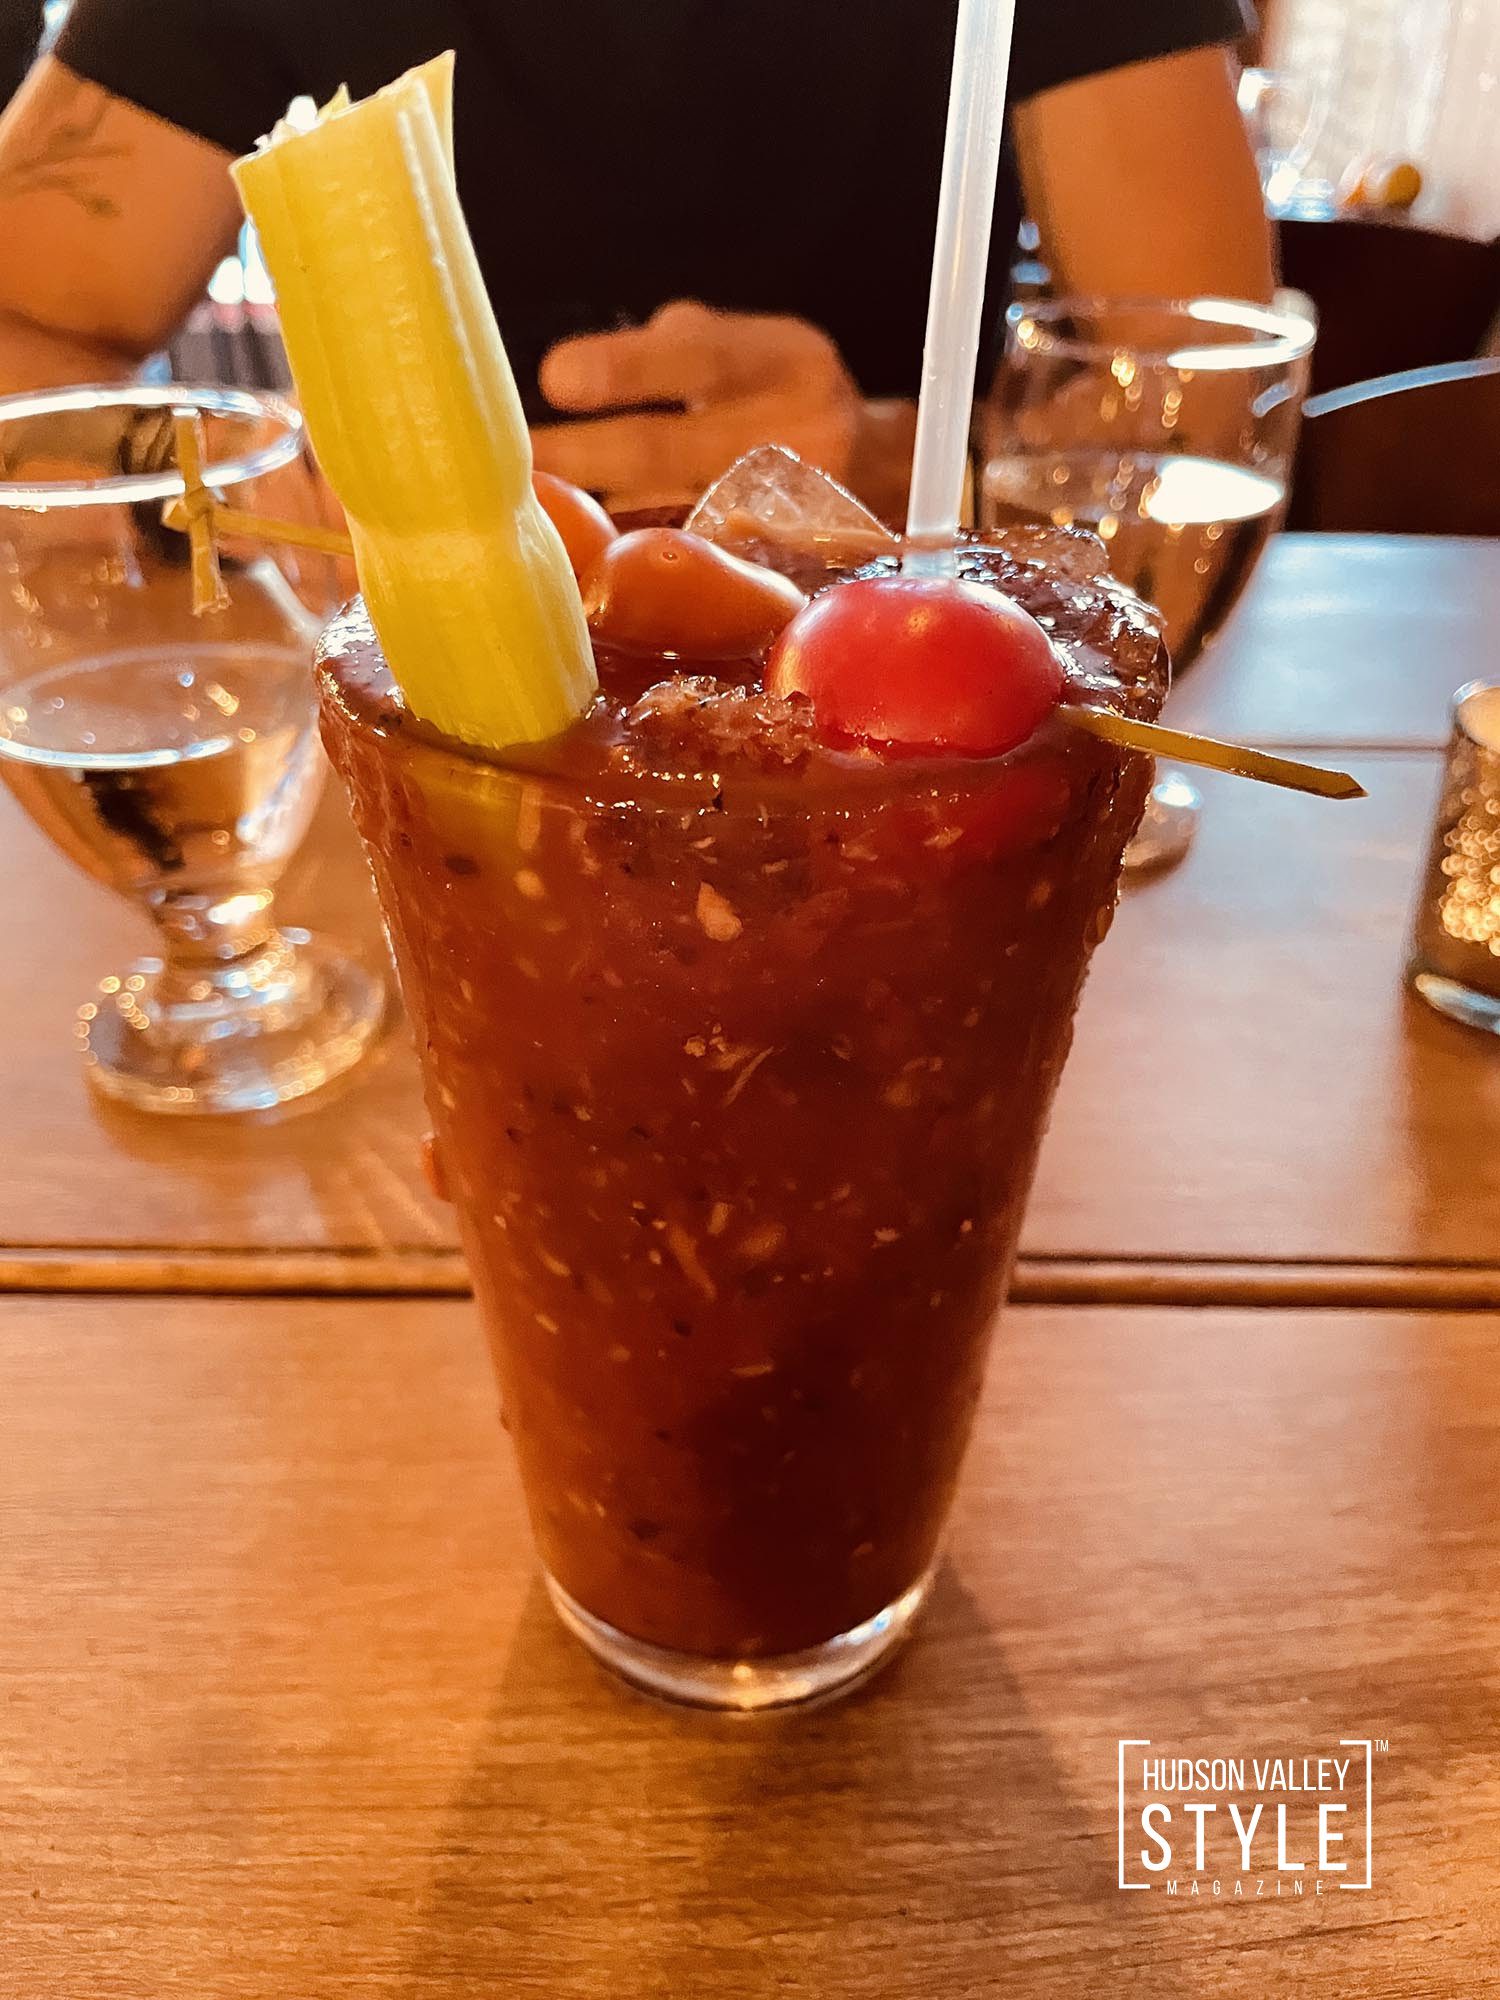 Chappie's Restaurant in Roxbury, NY: A Modern Rustic Dining Experience in the Heart of the Catskill Mountains – Restaurant Reviews with Maxwell Alexander